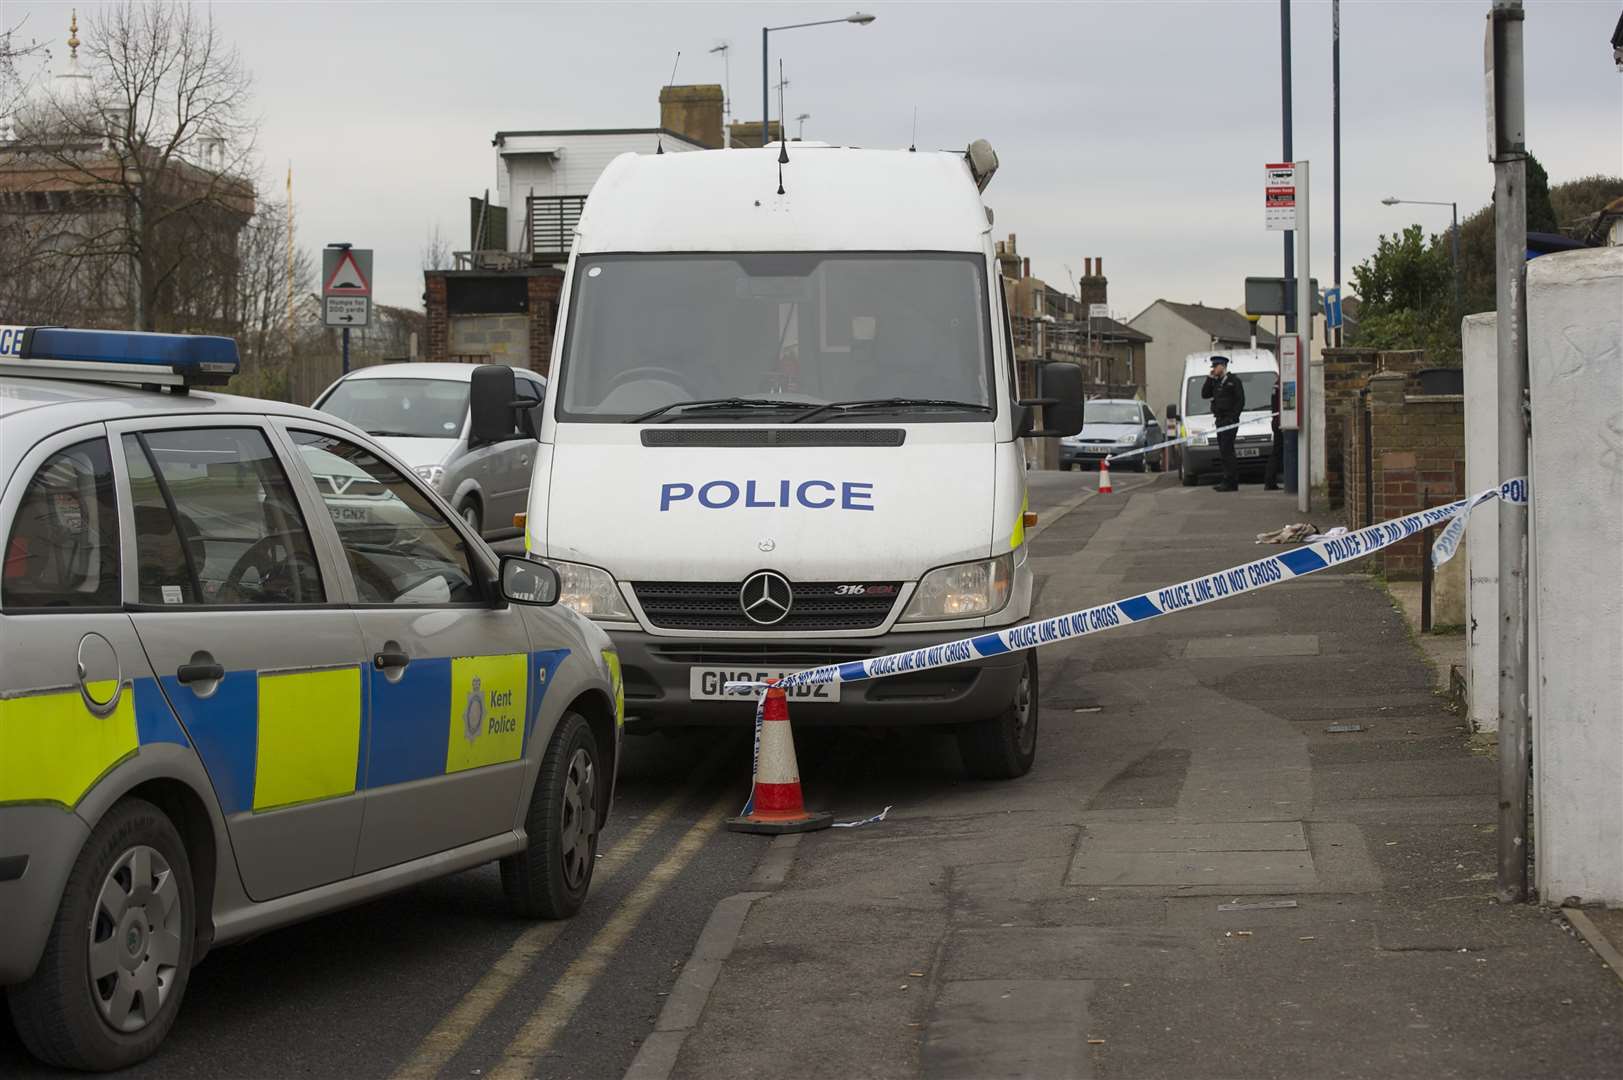 The stabbing unfolded near a bus stop